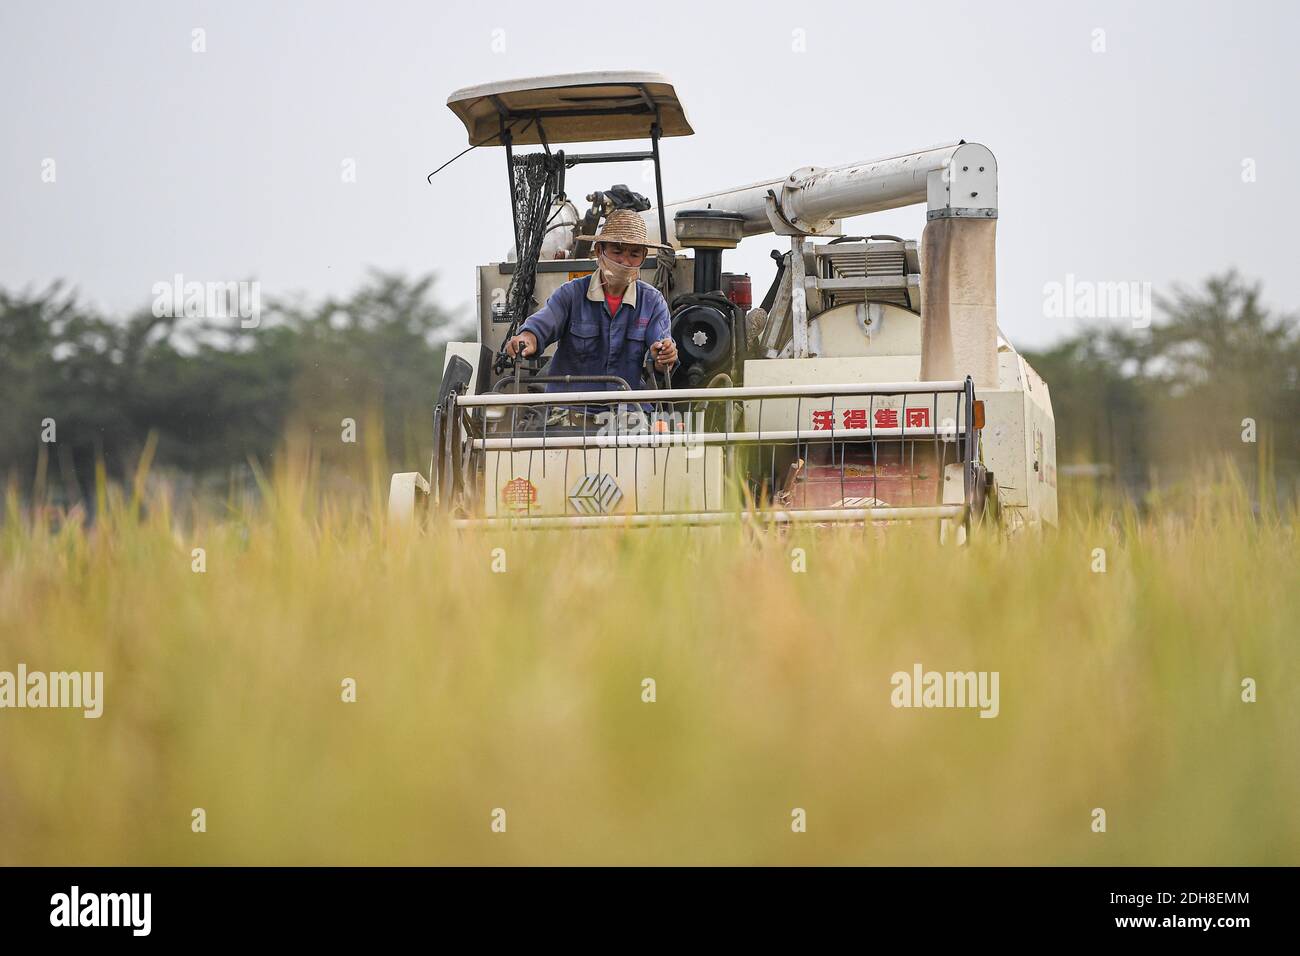 (201210) -- BEIJING, Dec. 10, 2020 (Xinhua) -- An employee operates a harvester in rice fields at Xinjiang Village, Longquan Township, Longhua District of Haikou City in south China's Hainan Province, Oct. 22, 2020.  China's grain output reached nearly 670 billion kg in 2020, up 5.65 billion kg, or 0.9 percent, from last year, the National Bureau of Statistics (NBS) said on Thursday.  This marks the sixth consecutive year that the country's total grain production has exceeded 650 billion kg. The bumper harvest comes despite disrupted farming as a result of the COVID-19 epidemic, which has been Stock Photo